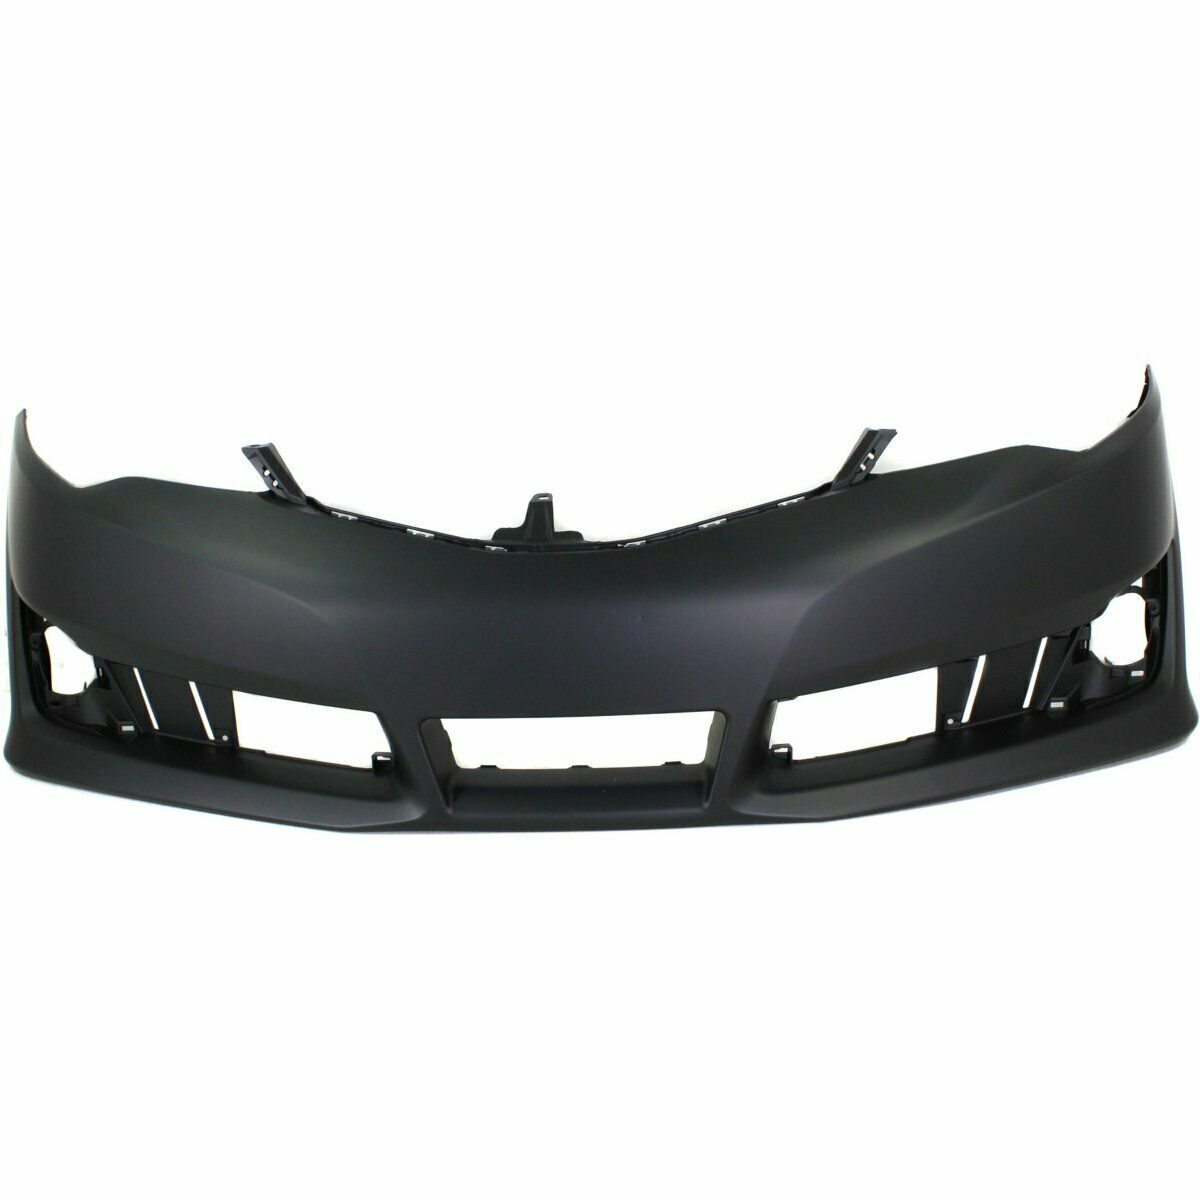 2012-2014 Toyota Camry SE Front Bumper Painted to Match